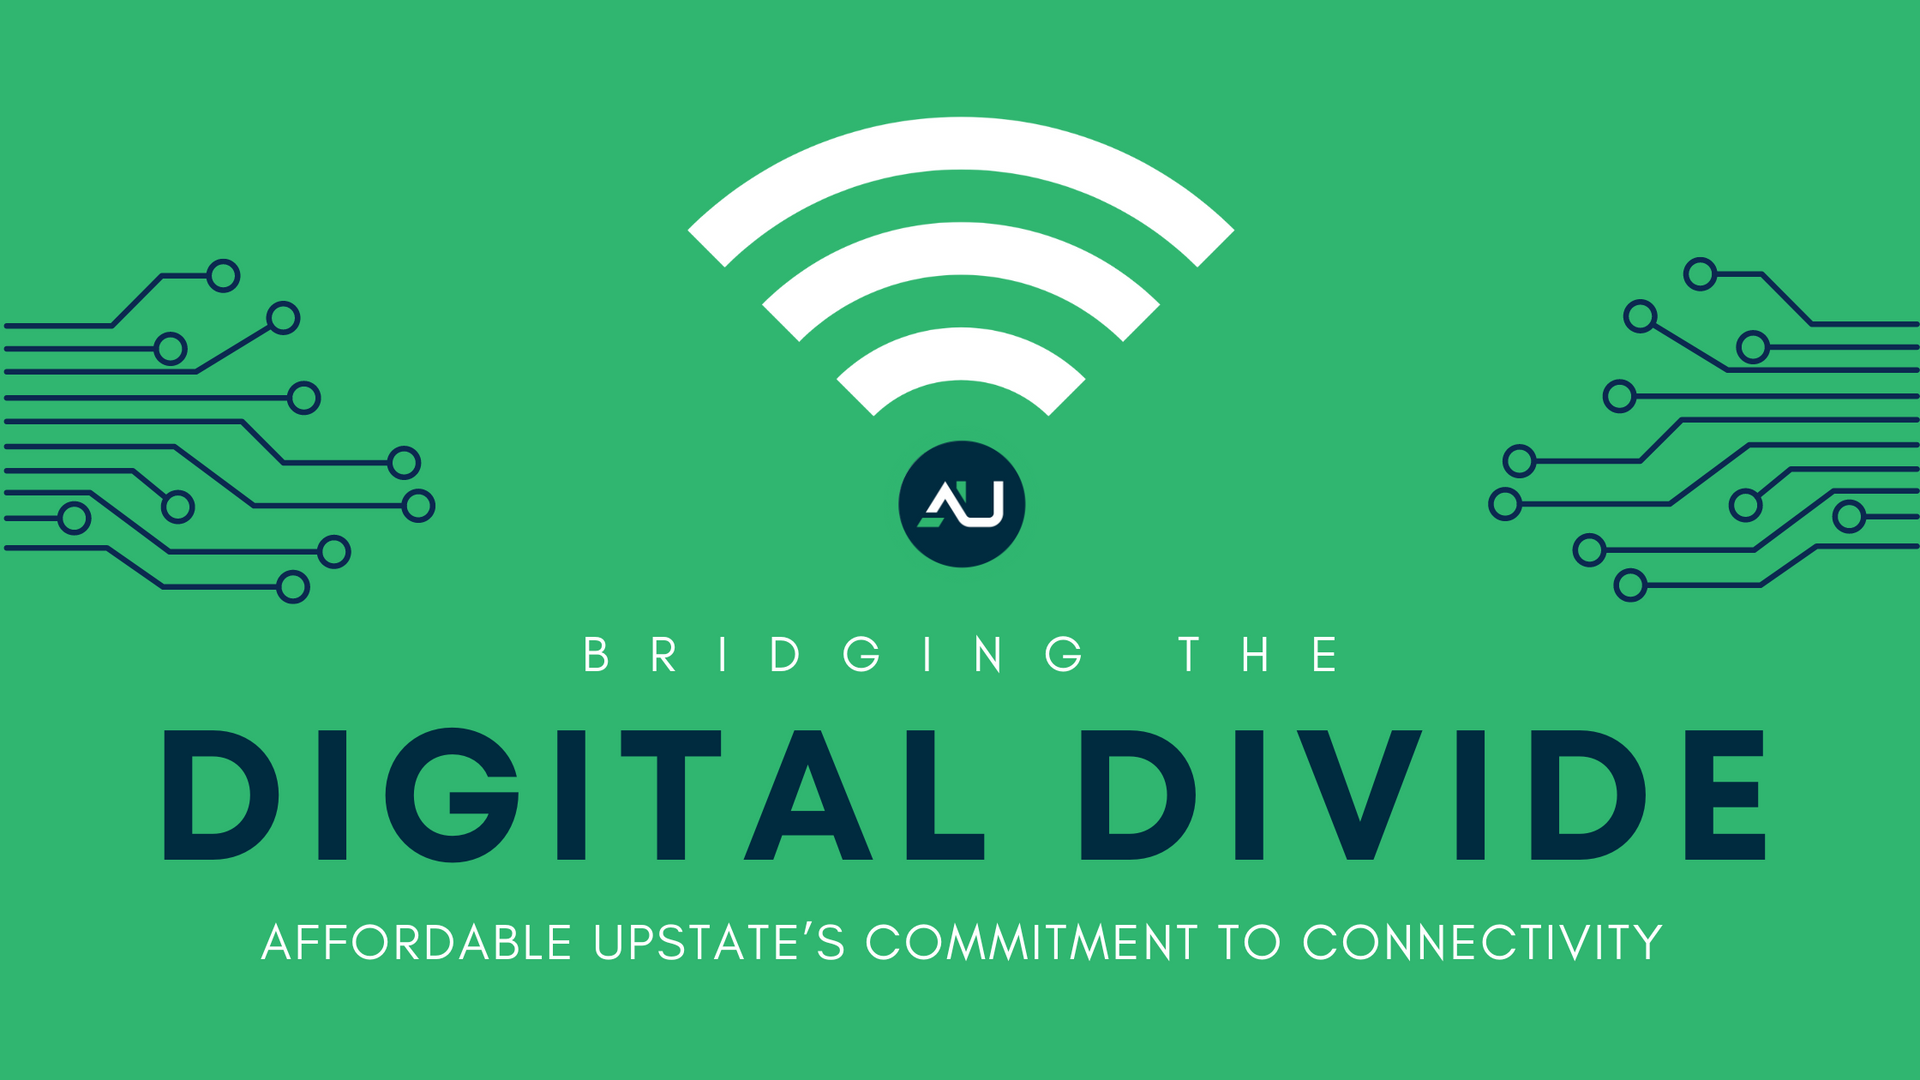 Bridging the Digital Divide: Affordable Upstate's Commitment to Connectivity